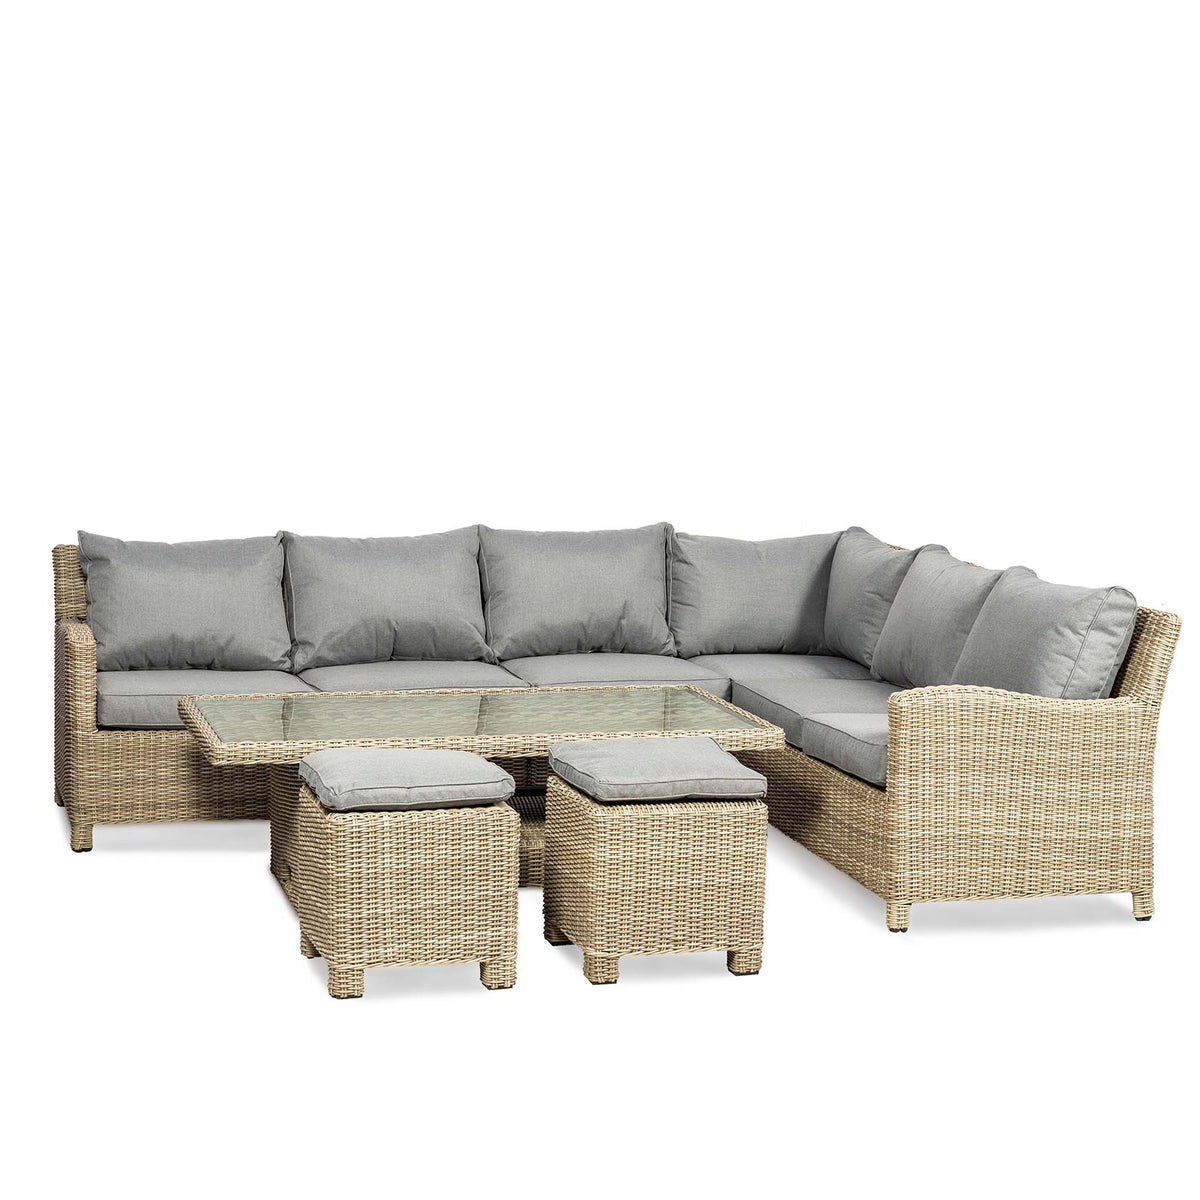 Wentworth Deluxe Rattan Corner Sofa Garden Lounge Set with Adjustable Table by Roseland Furniture